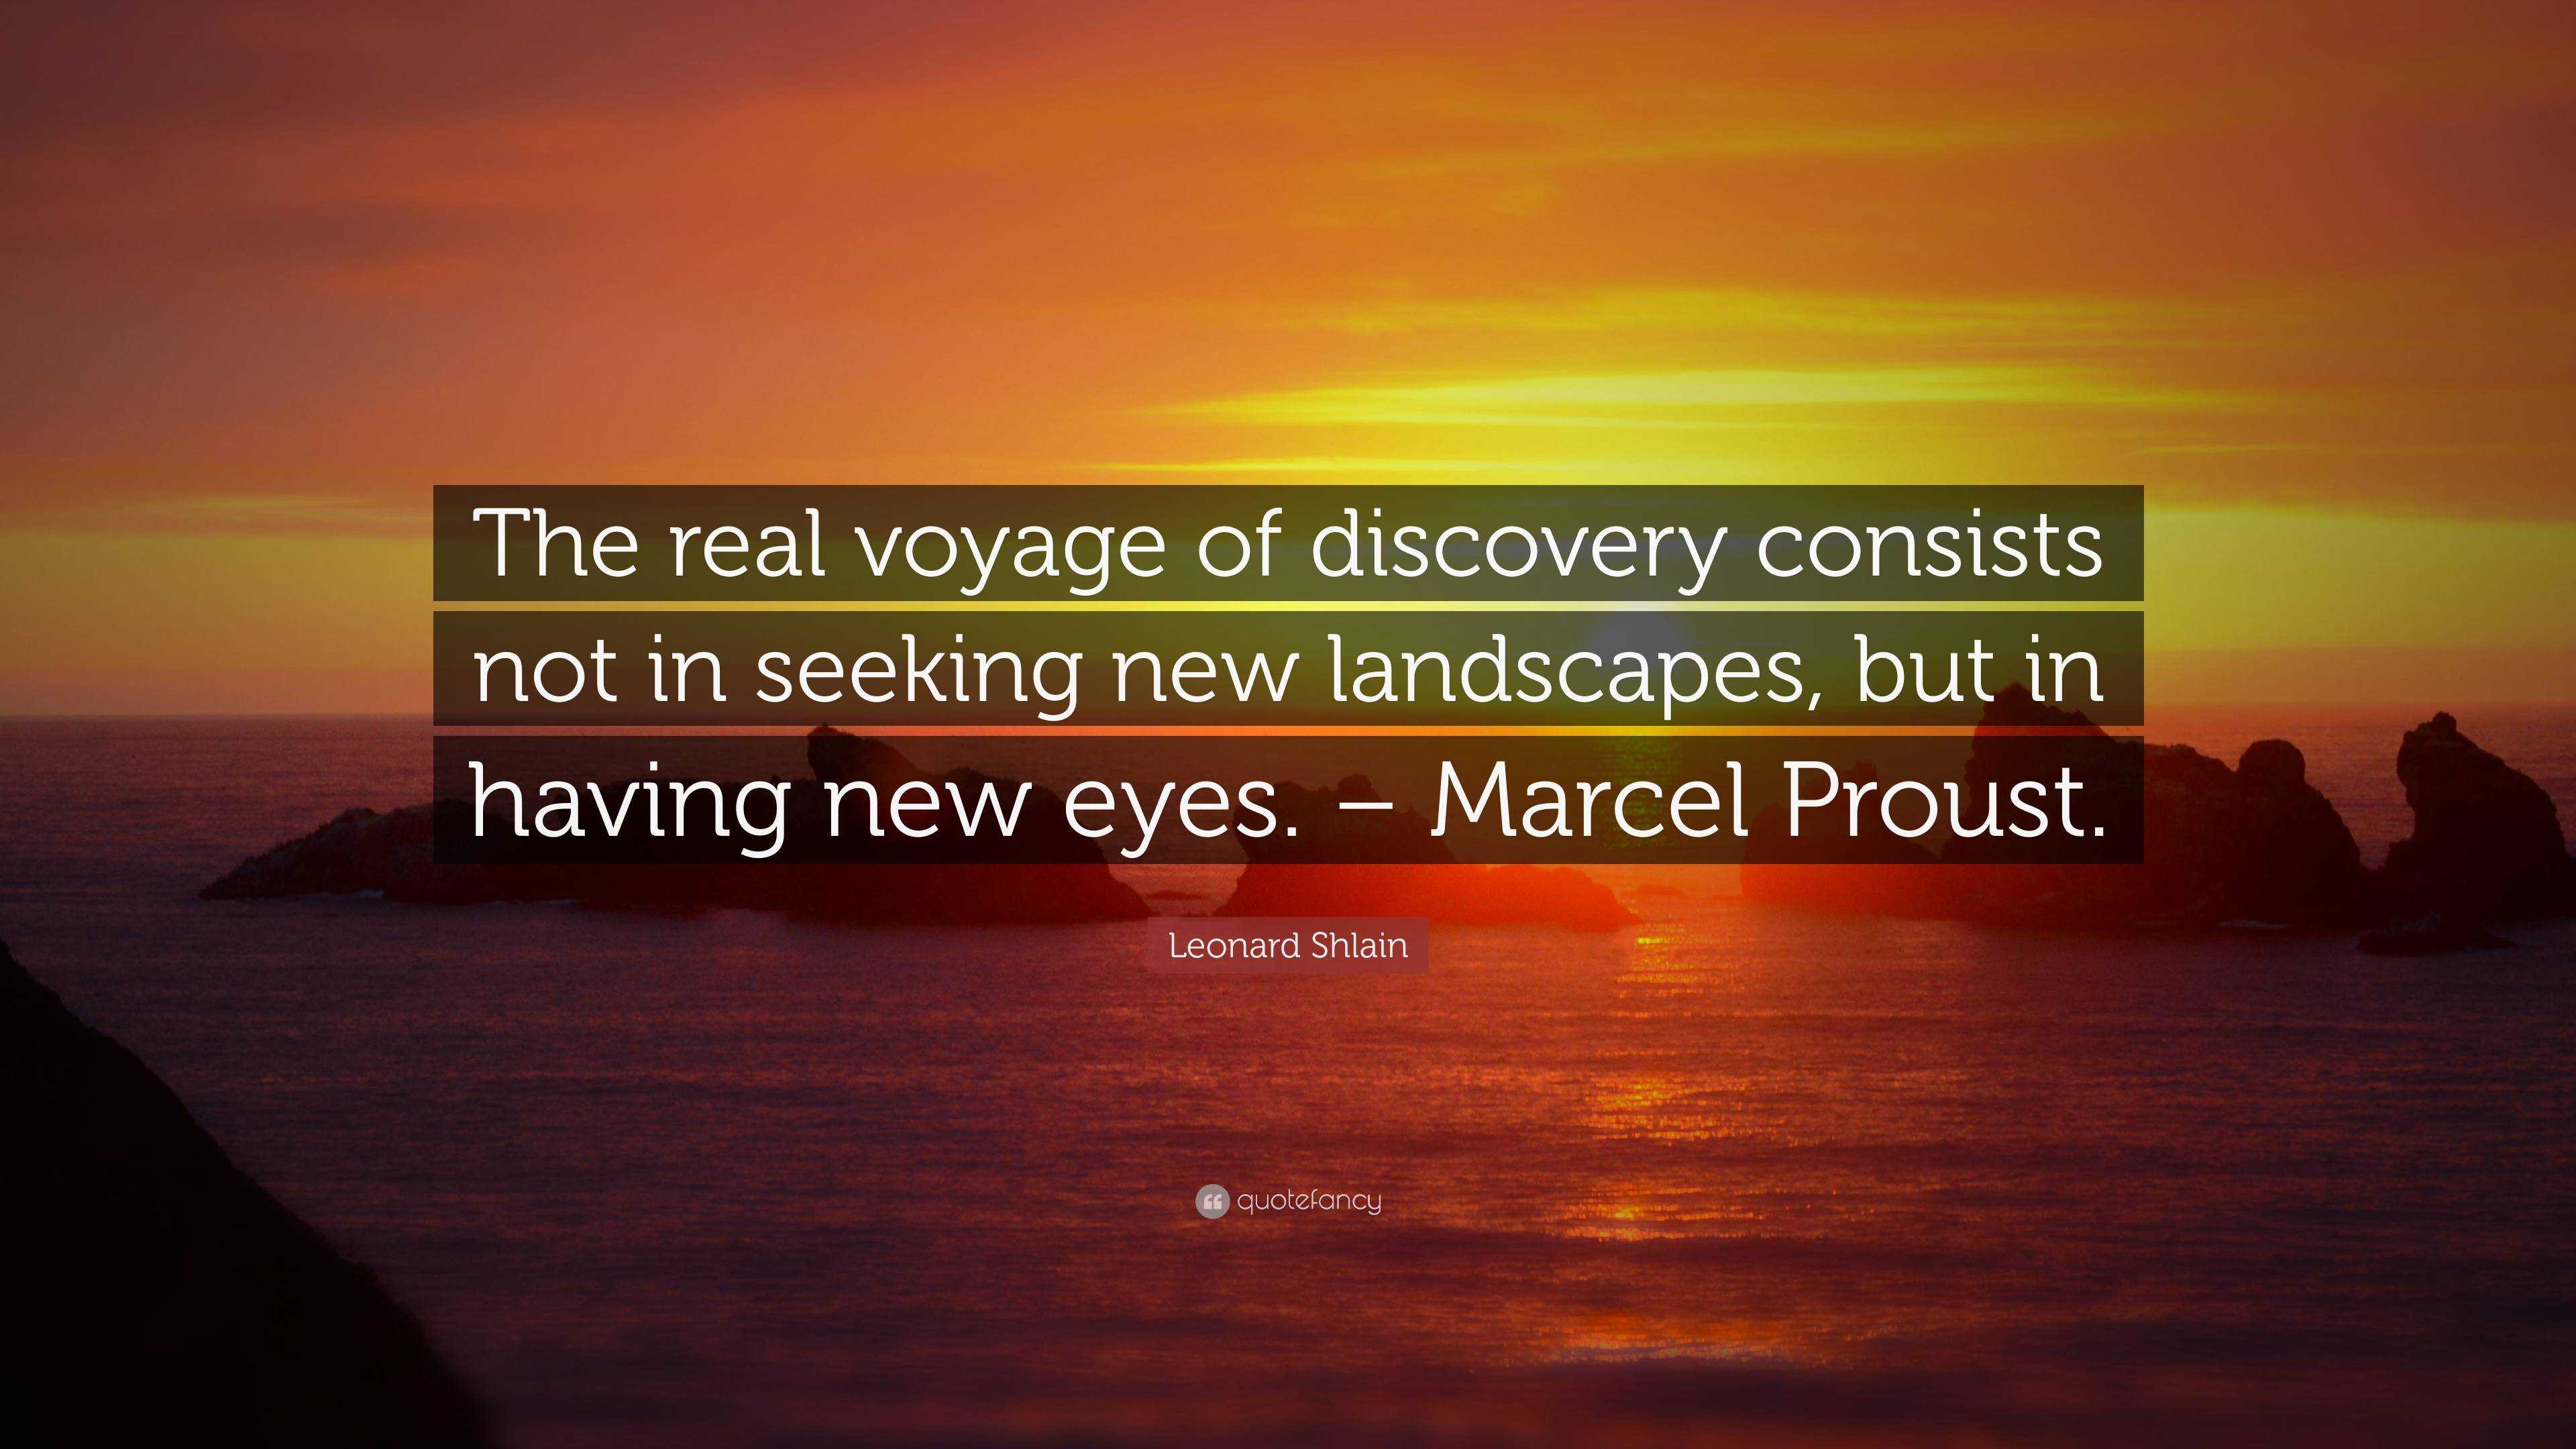 Leonard Shlain Quote The Real Voyage Of Discovery Consists Not In Seeking New Landscapes But